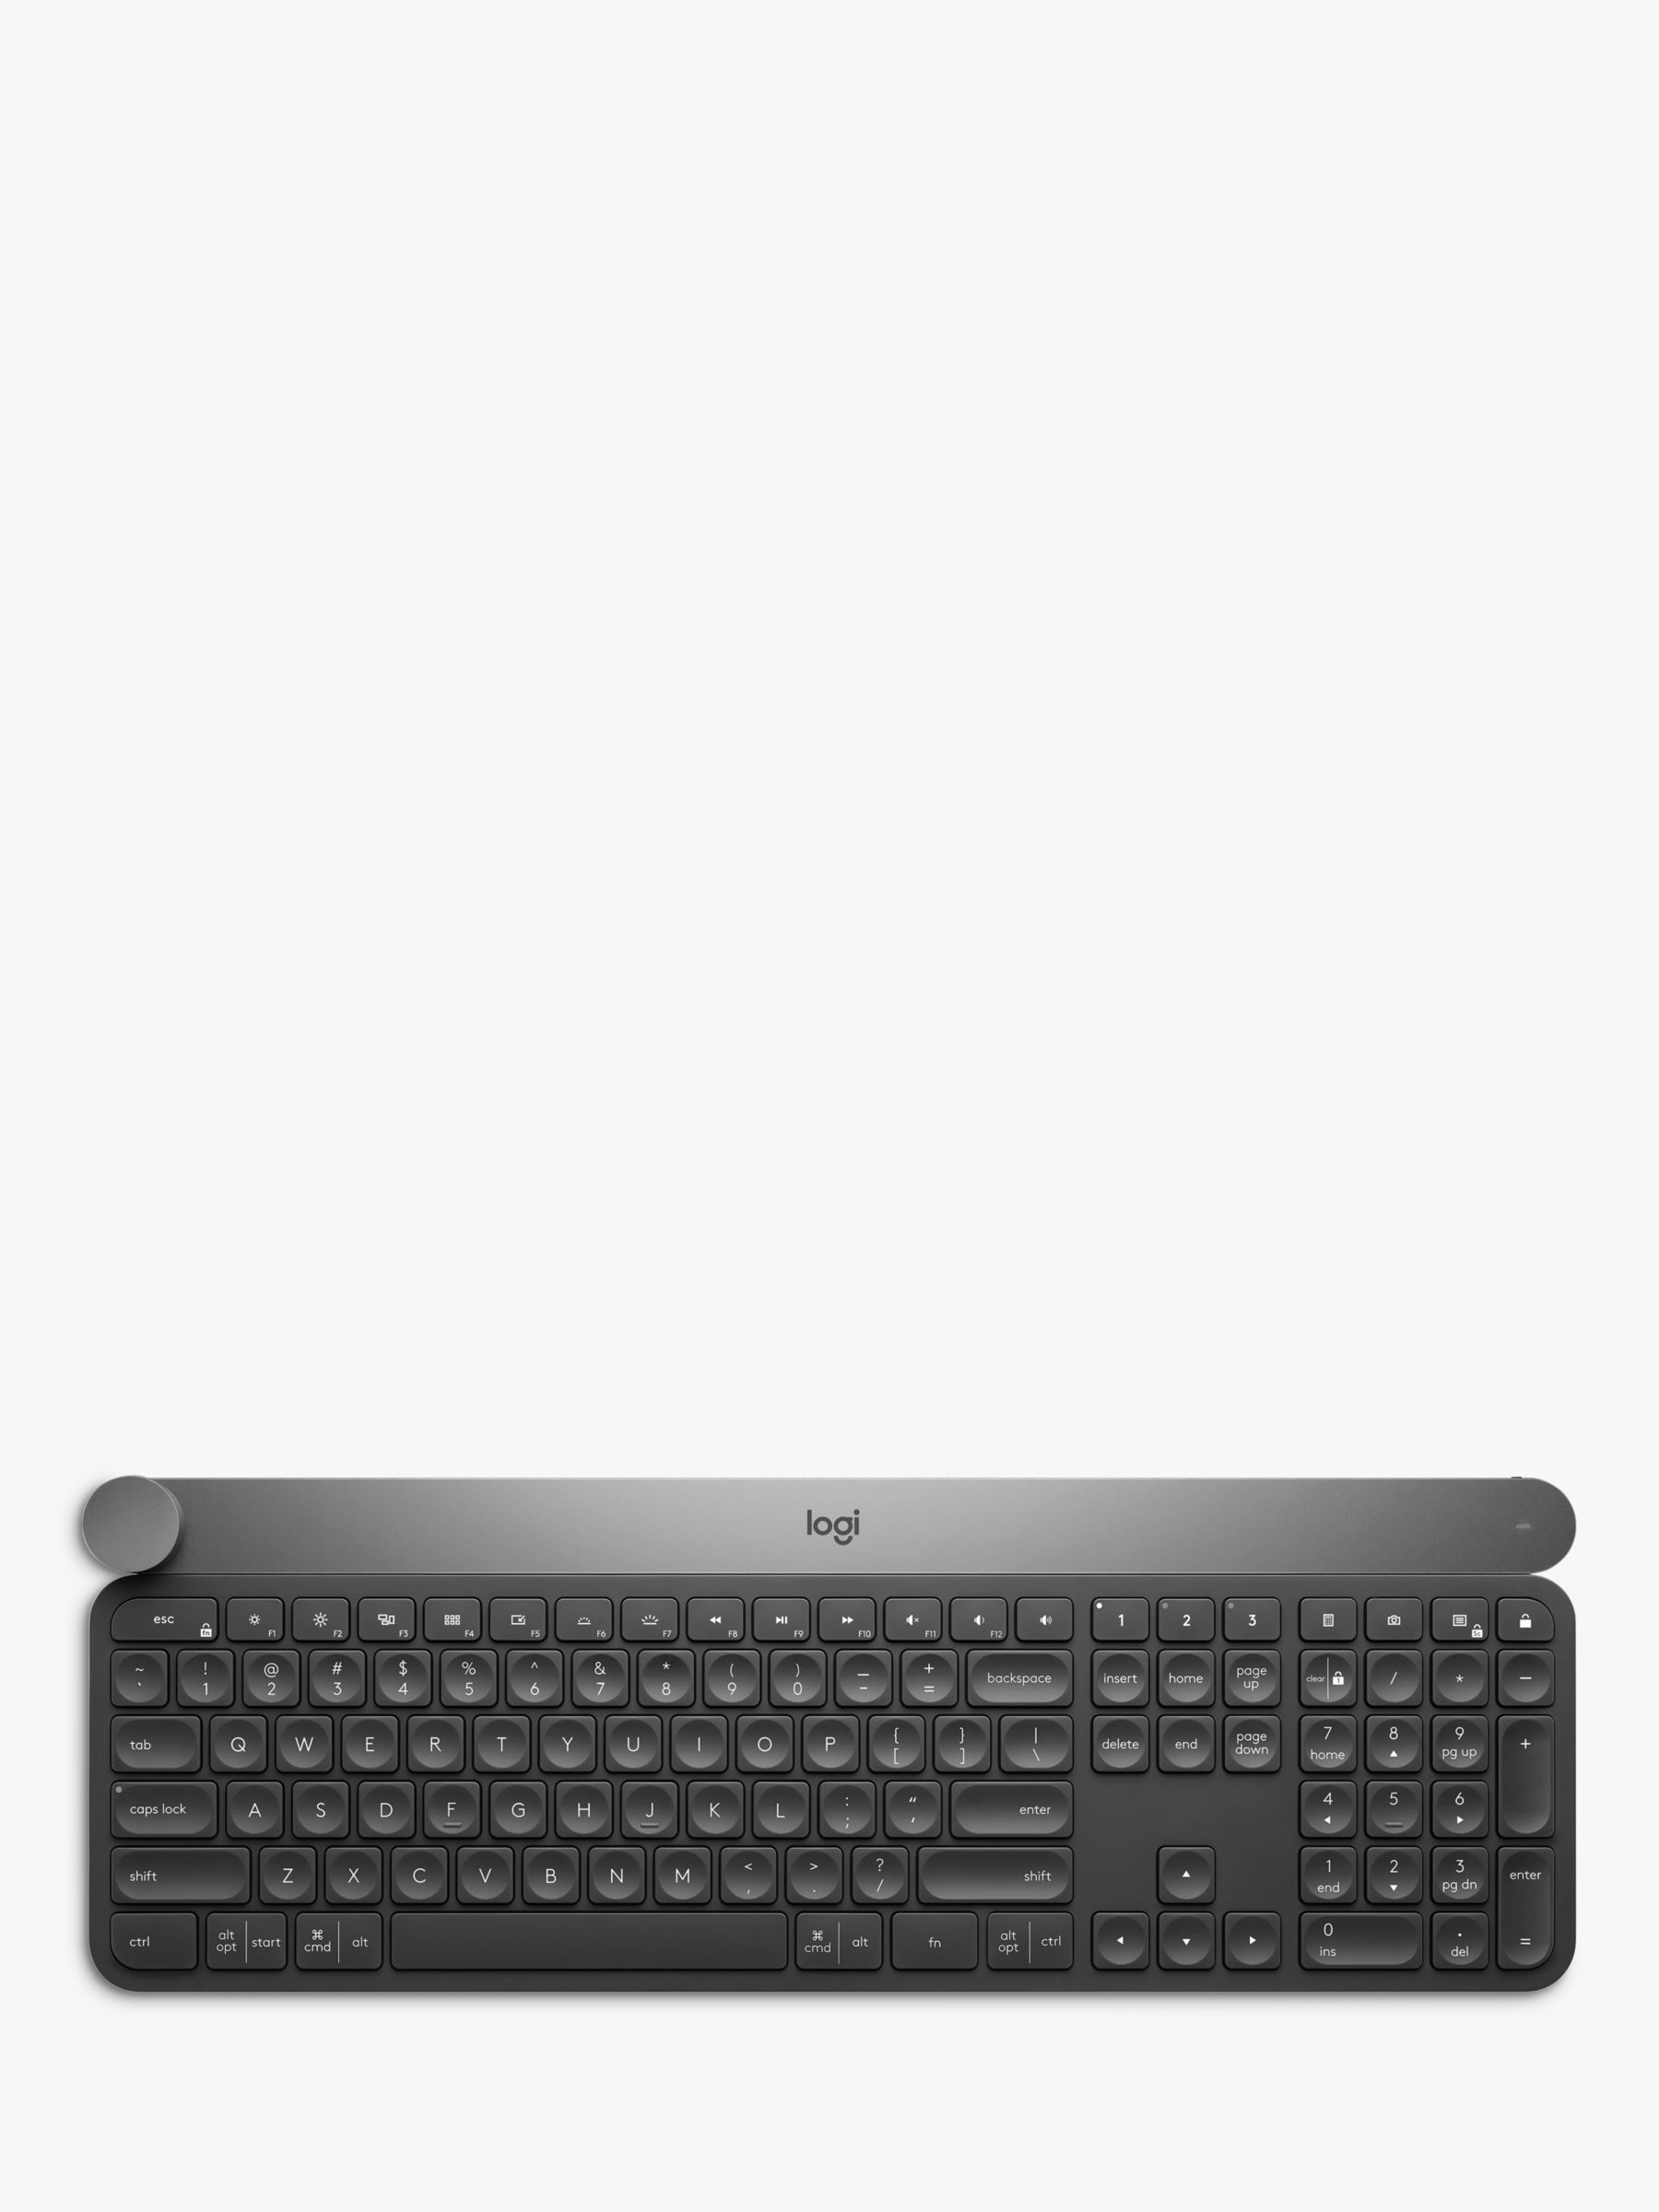 Logitech Craft Wireless Keyboard with Creative Input Dial, Black Review thumbnail